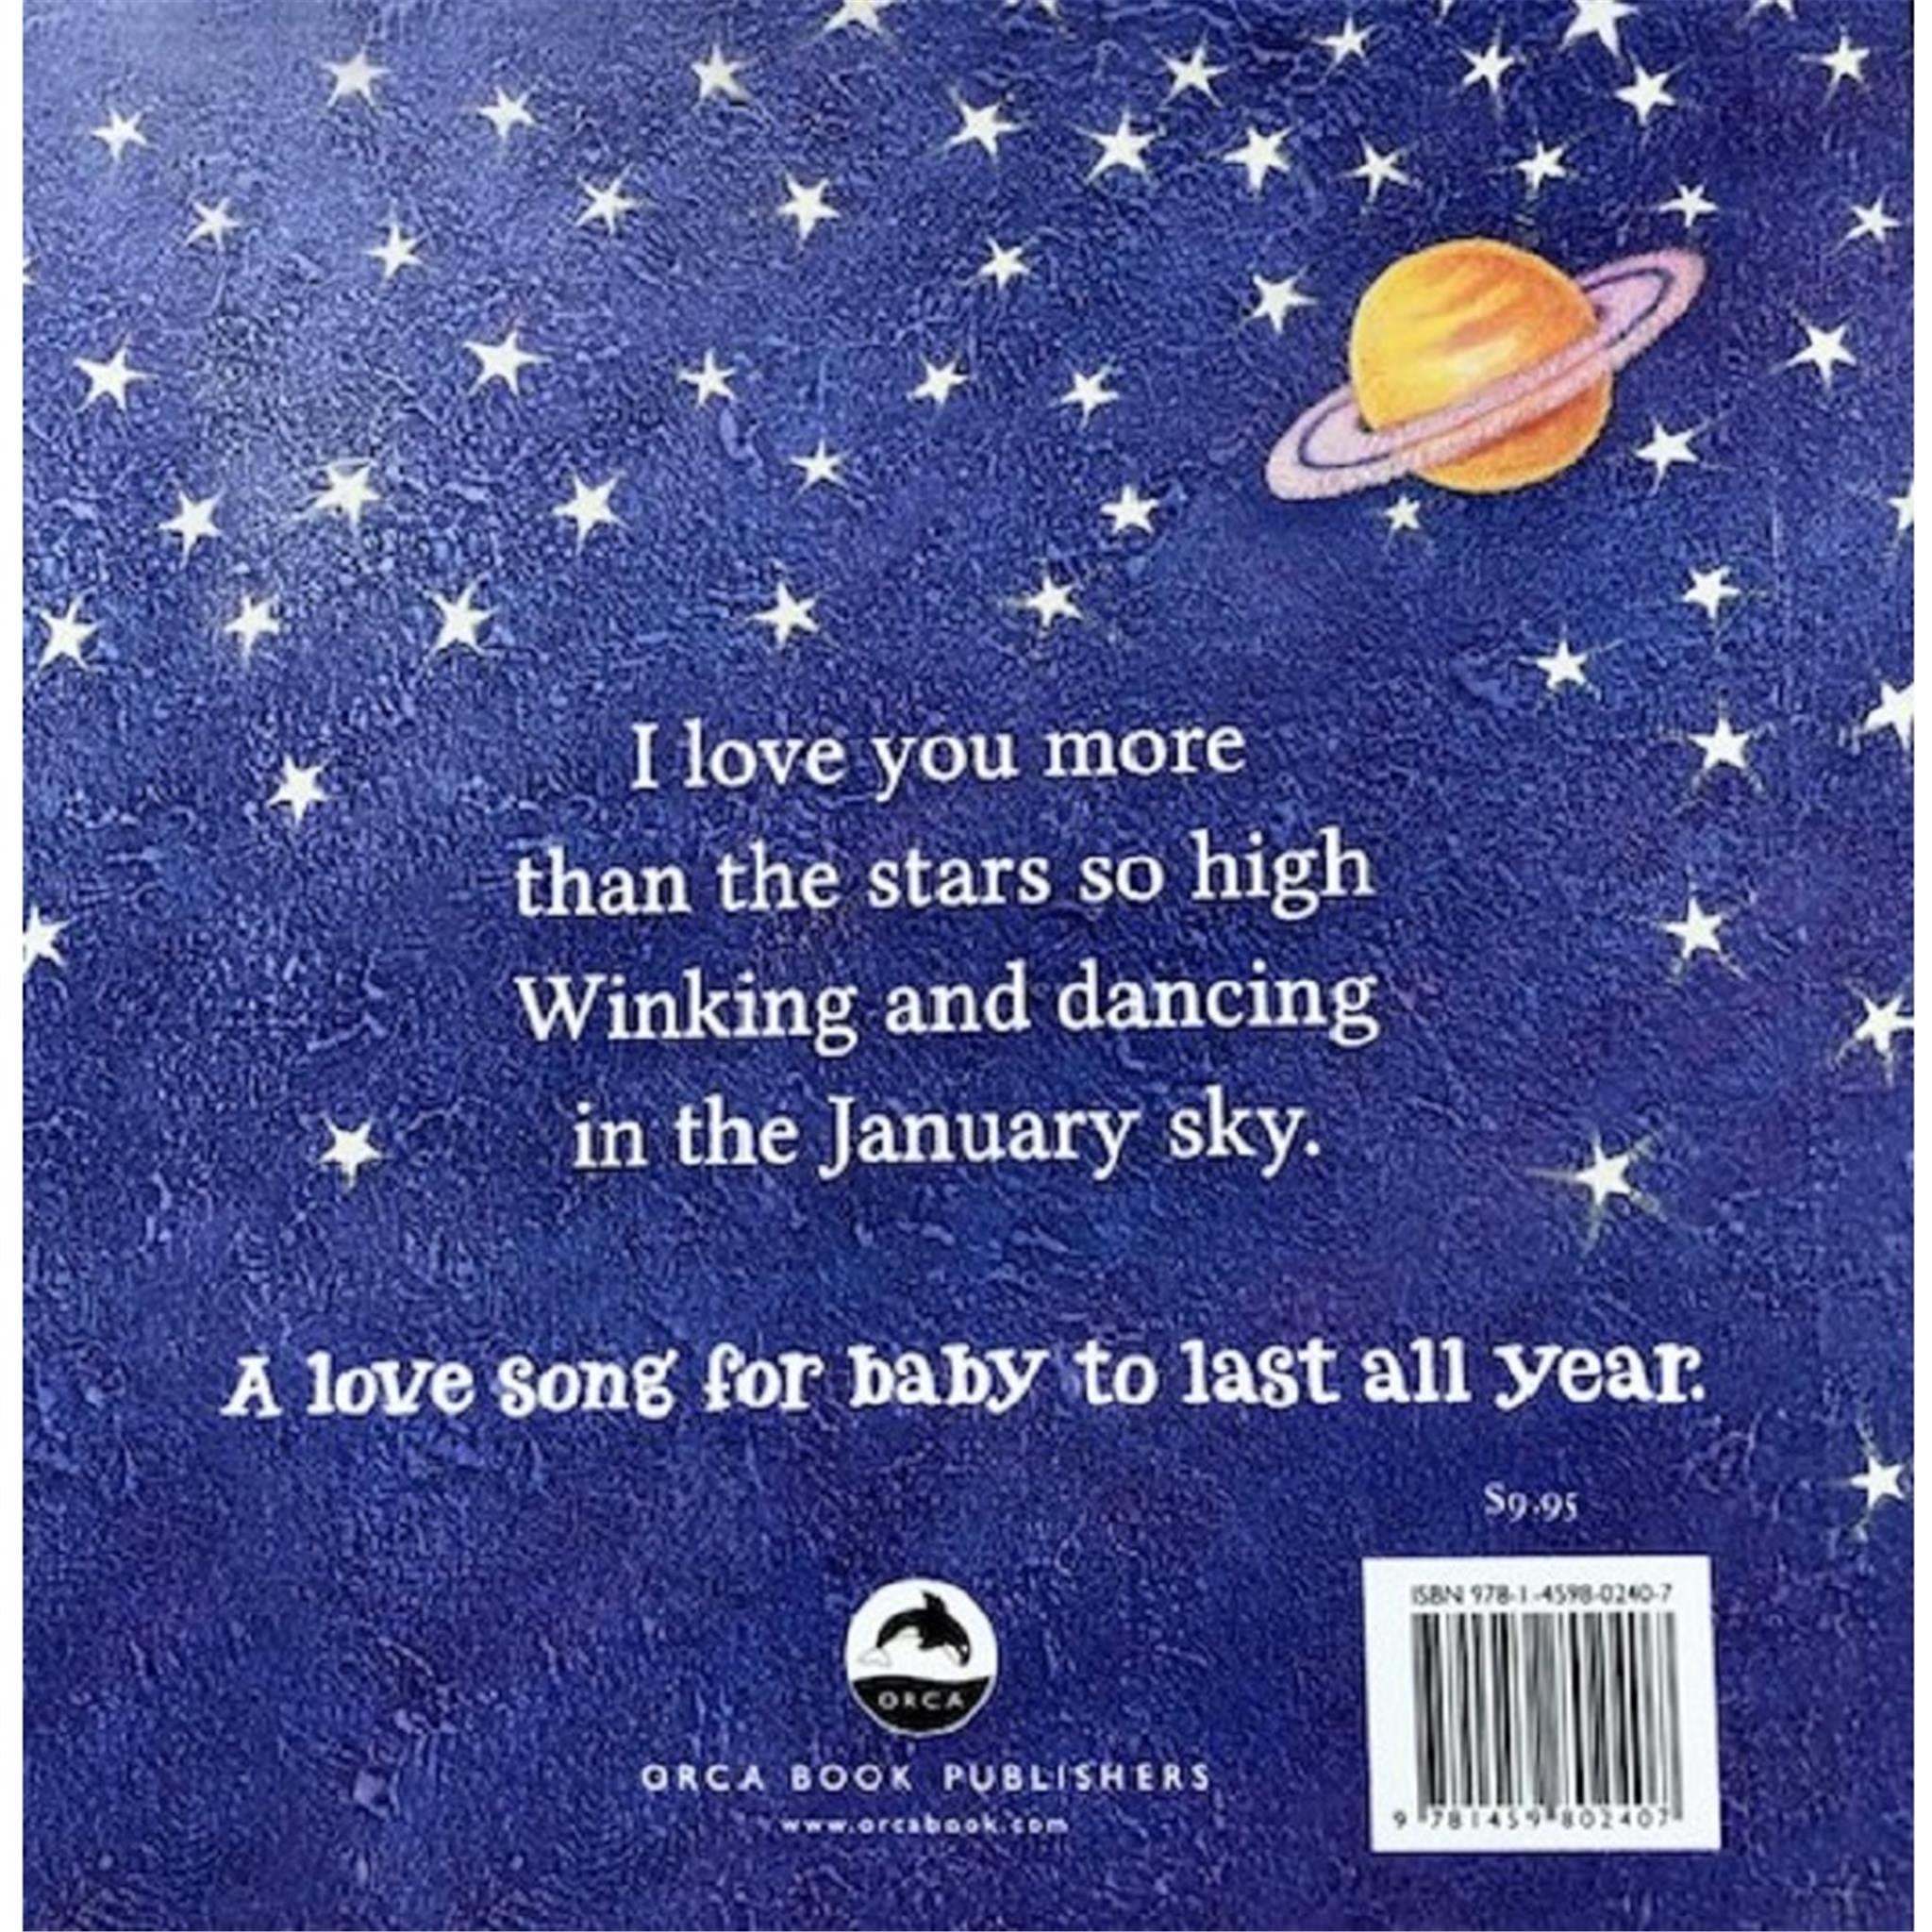 Love You More Childrens Book